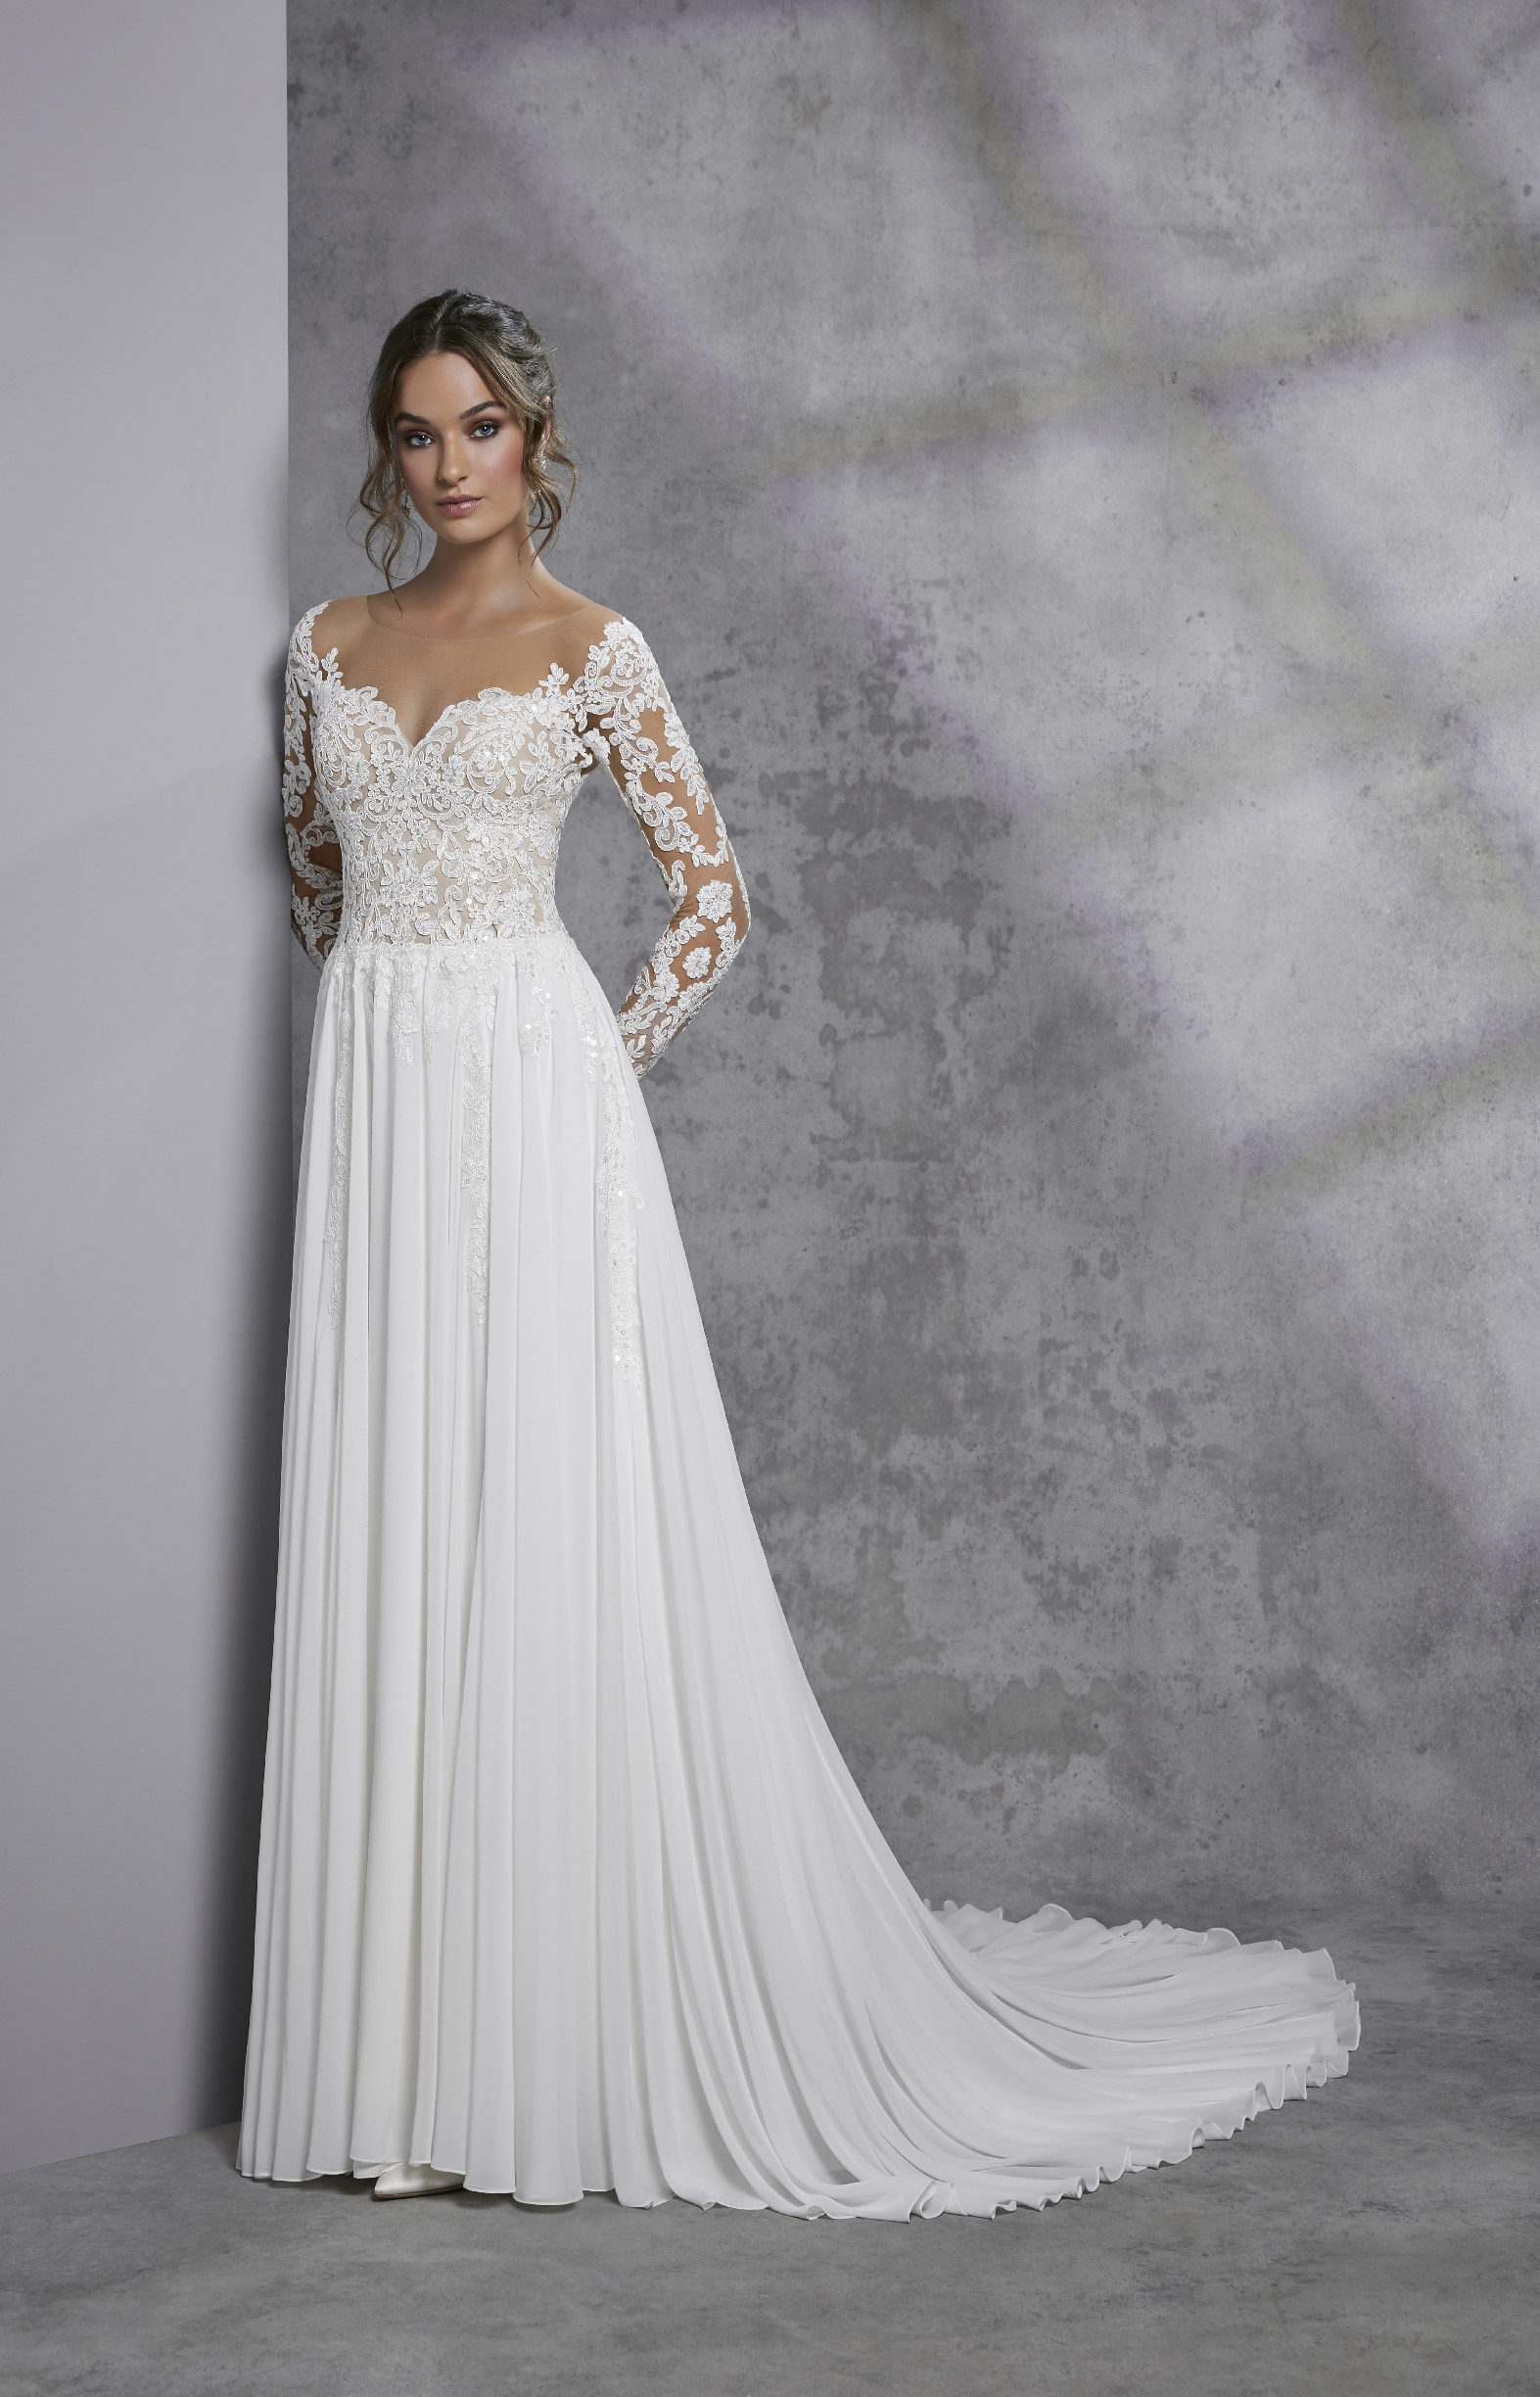 Model in Ronald Joyce style 18317, an elegant A-line boho wedding dress with off-the-shoulder long lace sleeves, a beaded sweetheart bodice and contrasting plain chiffon skirt